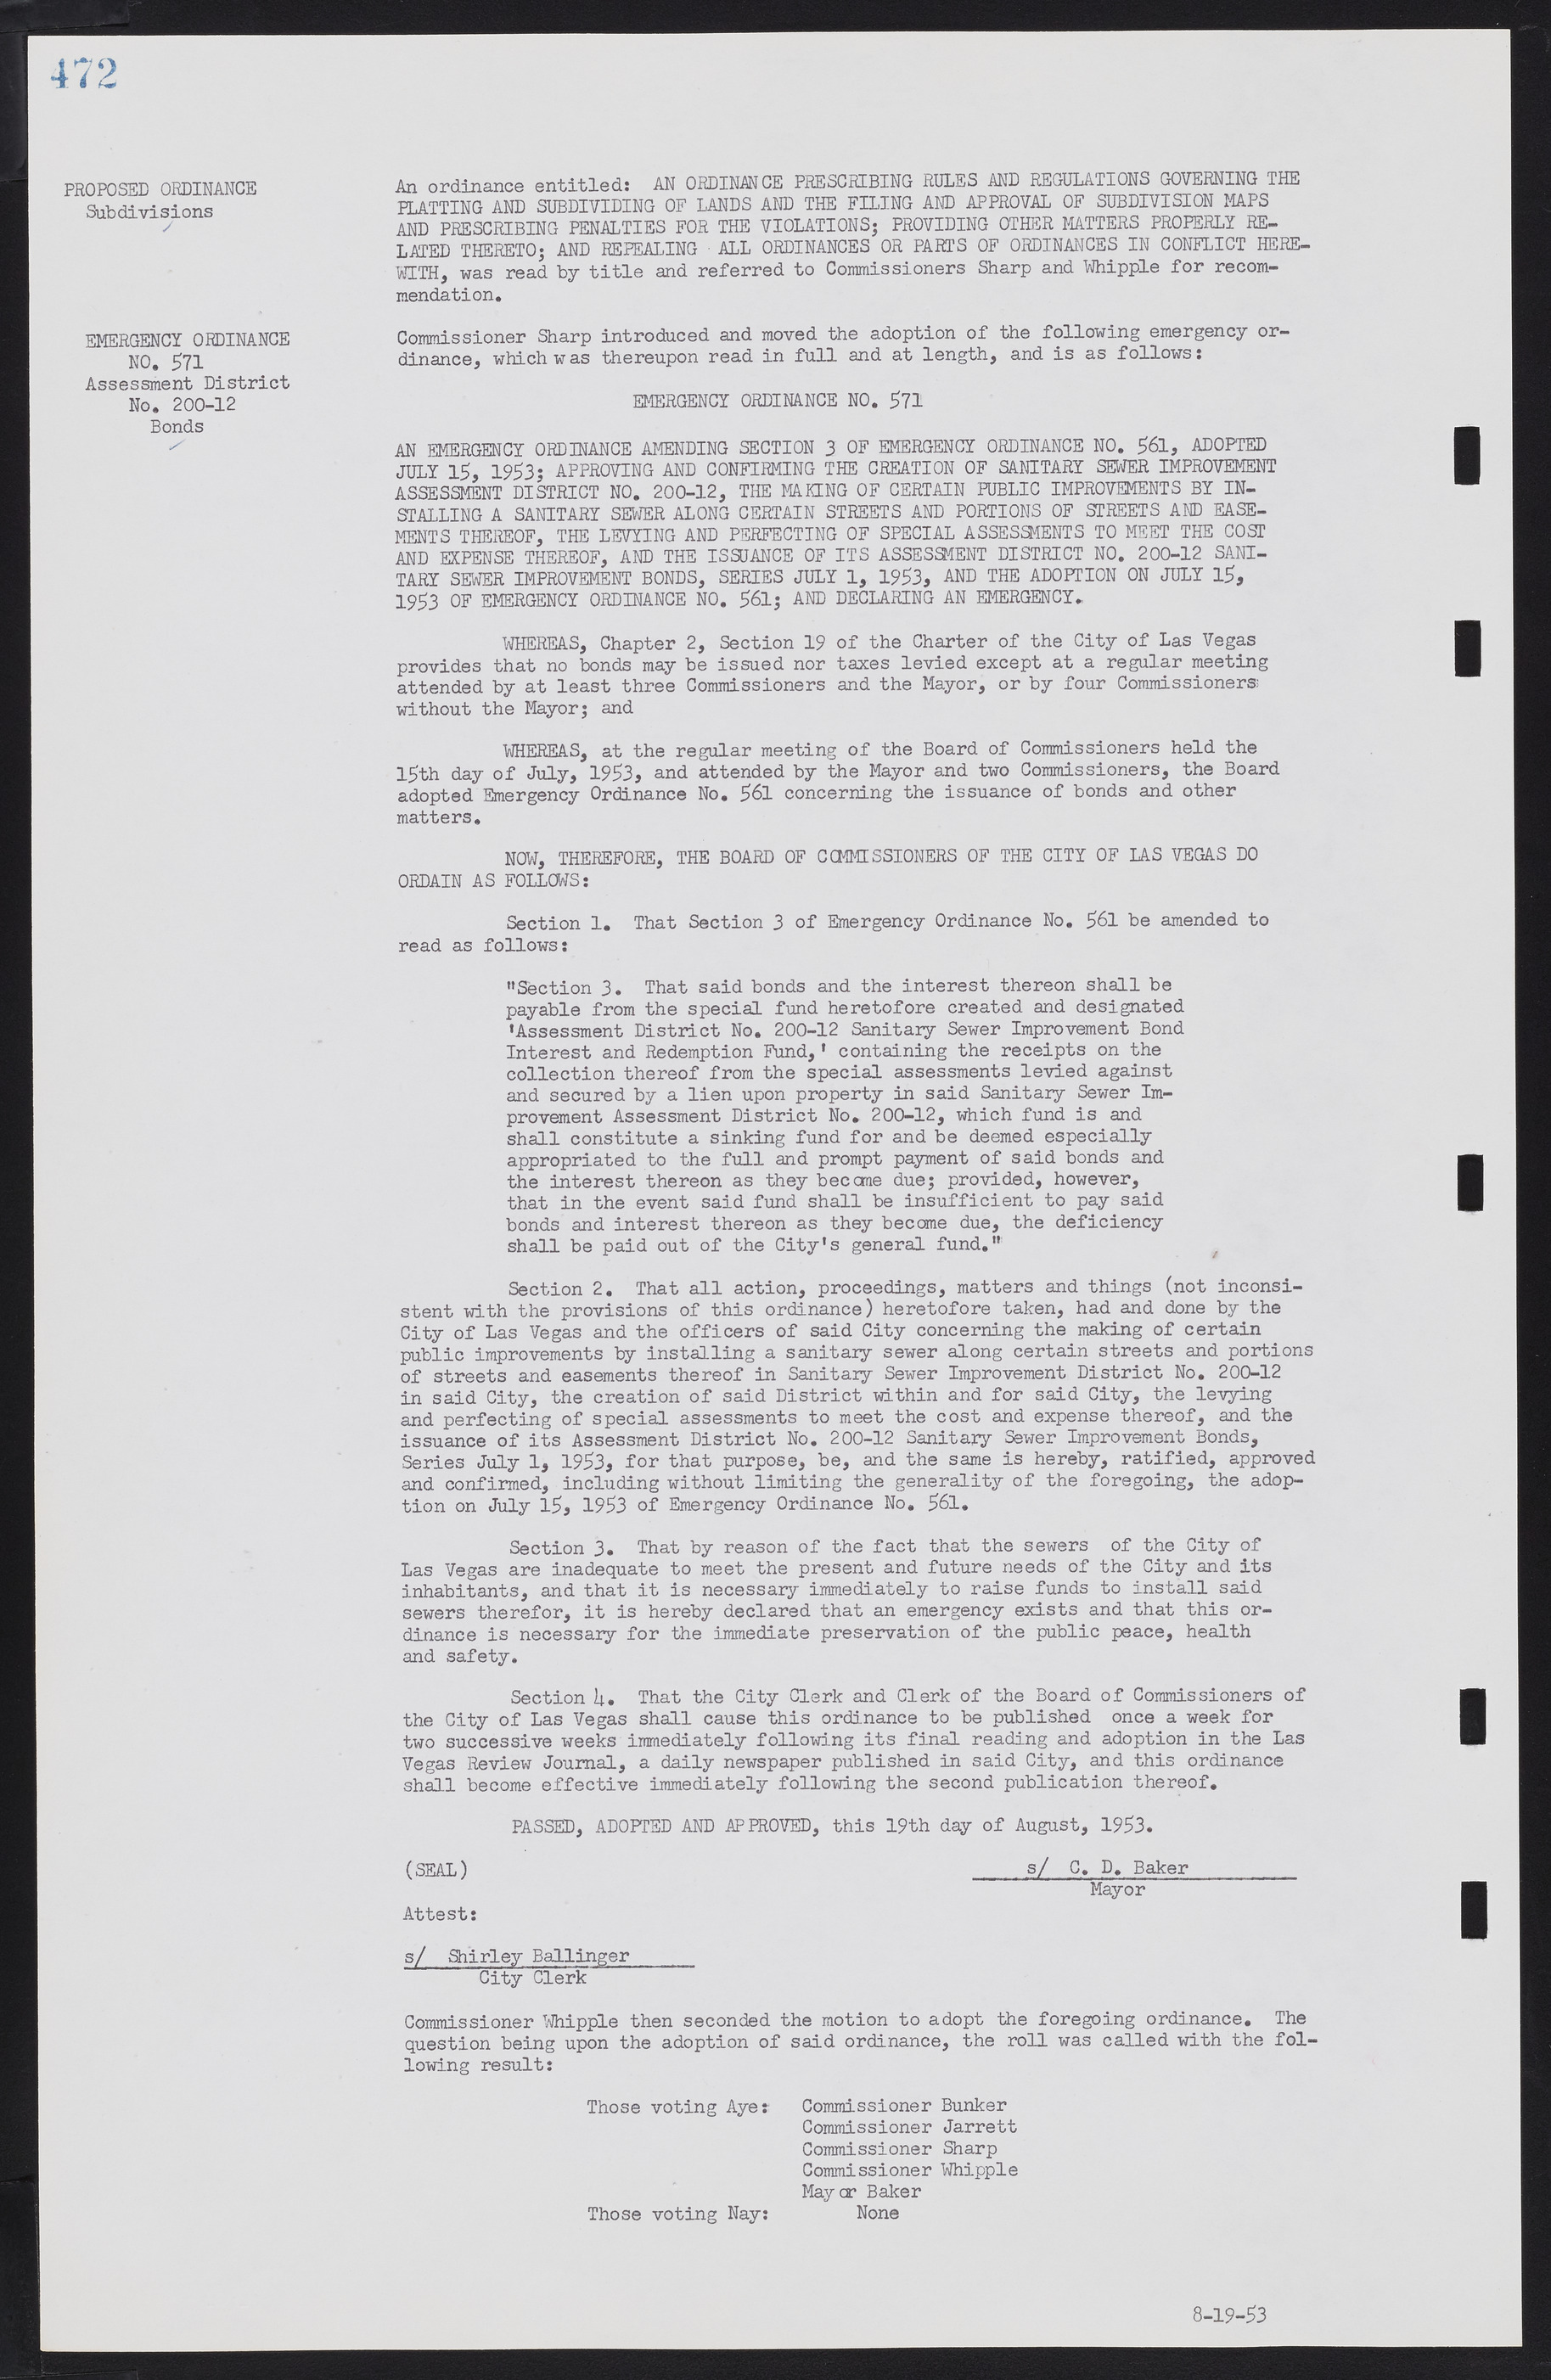 Las Vegas City Commission Minutes, May 26, 1952 to February 17, 1954, lvc000008-502